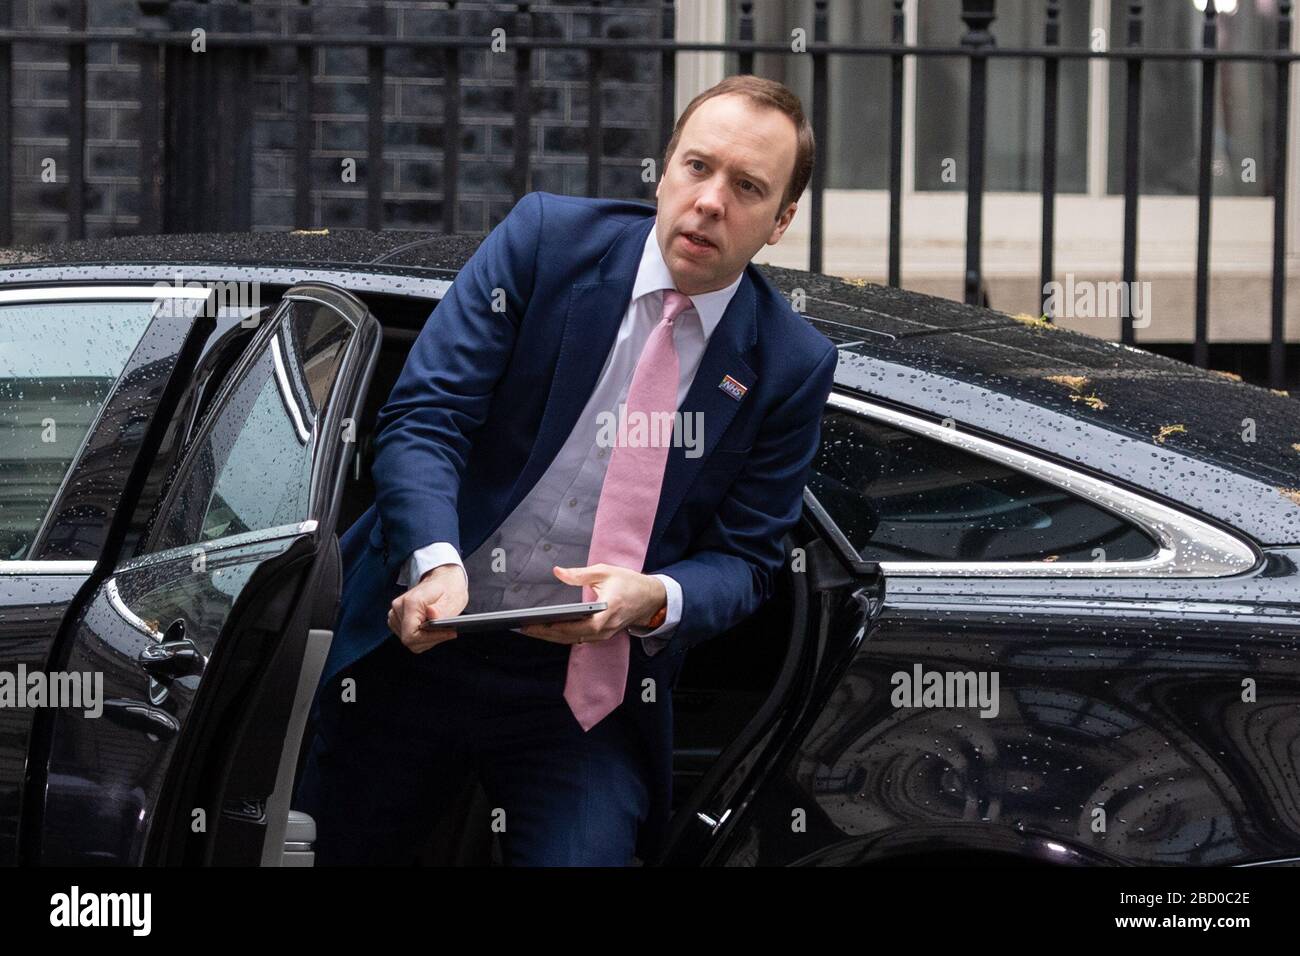 Health Secretary Matt Hancock arrives in Downing Street, London, after Prime Minister Boris Johnson was admitted to hospital for tests as his coronavirus symptoms persist. Stock Photo